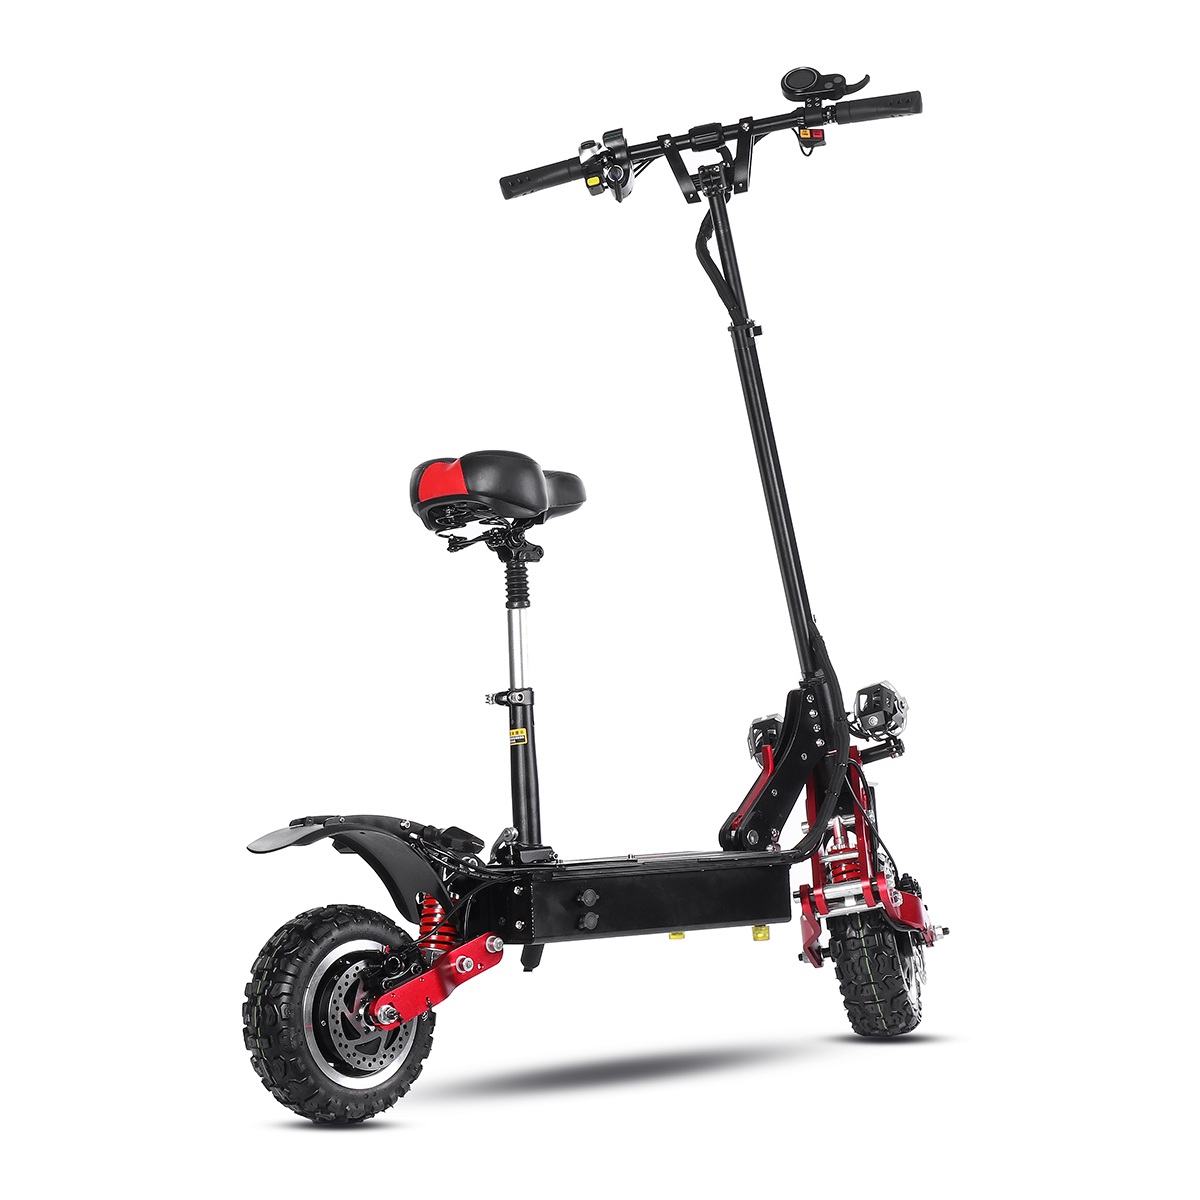 Find LAOTIE ES18P 60V 21700 Battery 33 6Ah 2800W 2 Dual Motor Foldable Electric Scooter With Saddle Mileage 200kg Bearing EU Plug for Sale on Gipsybee.com with cryptocurrencies